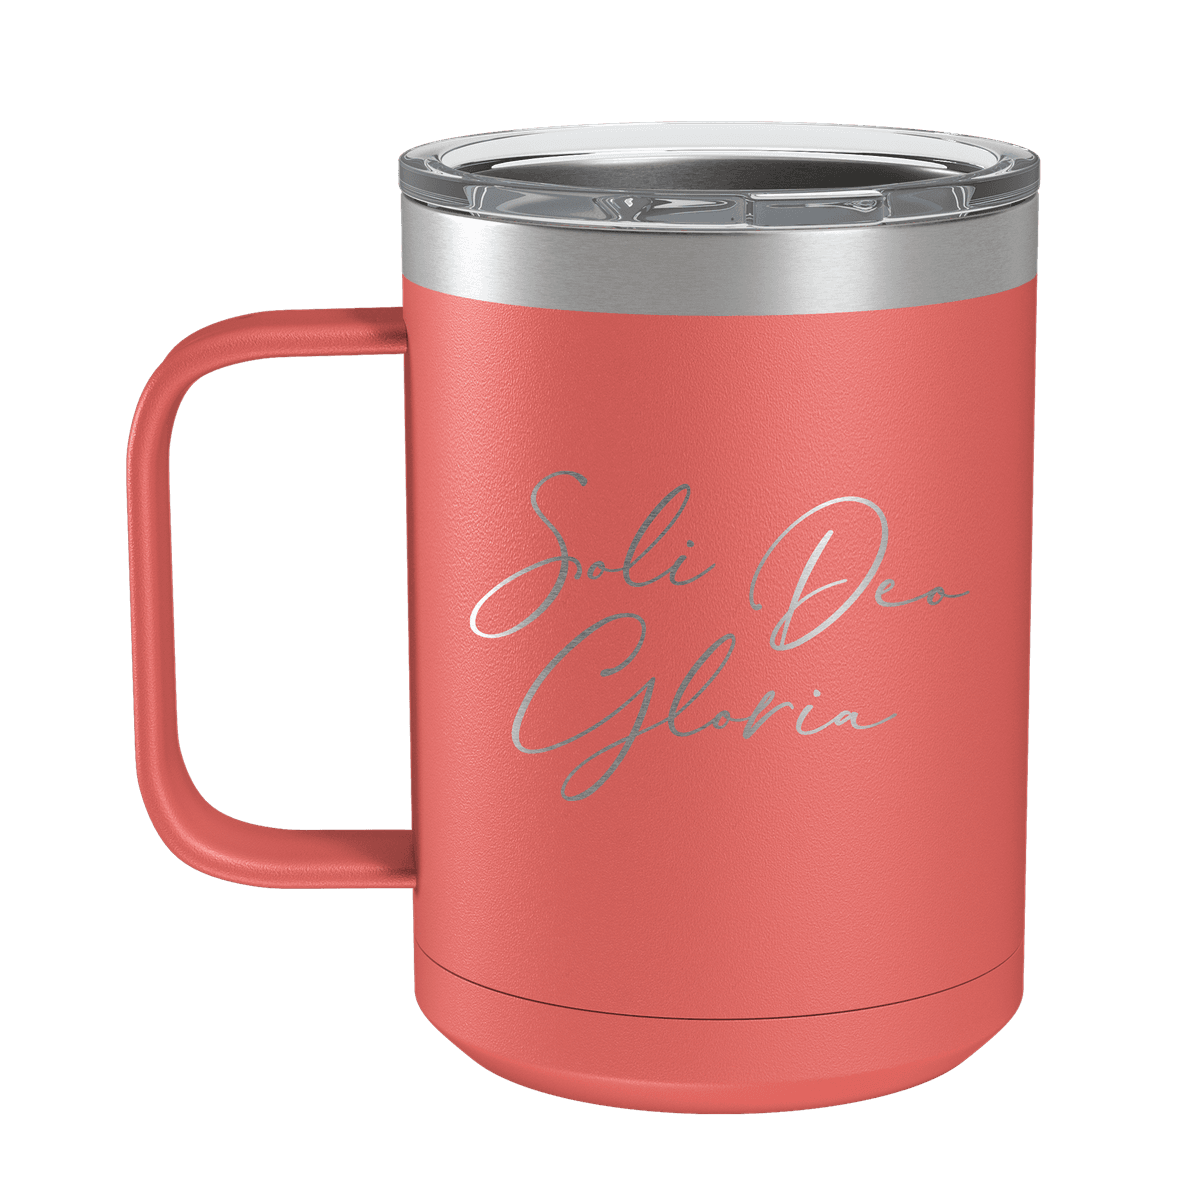 15 oz Stainless Steel Insulated Coffee Mug Powder Coated Double